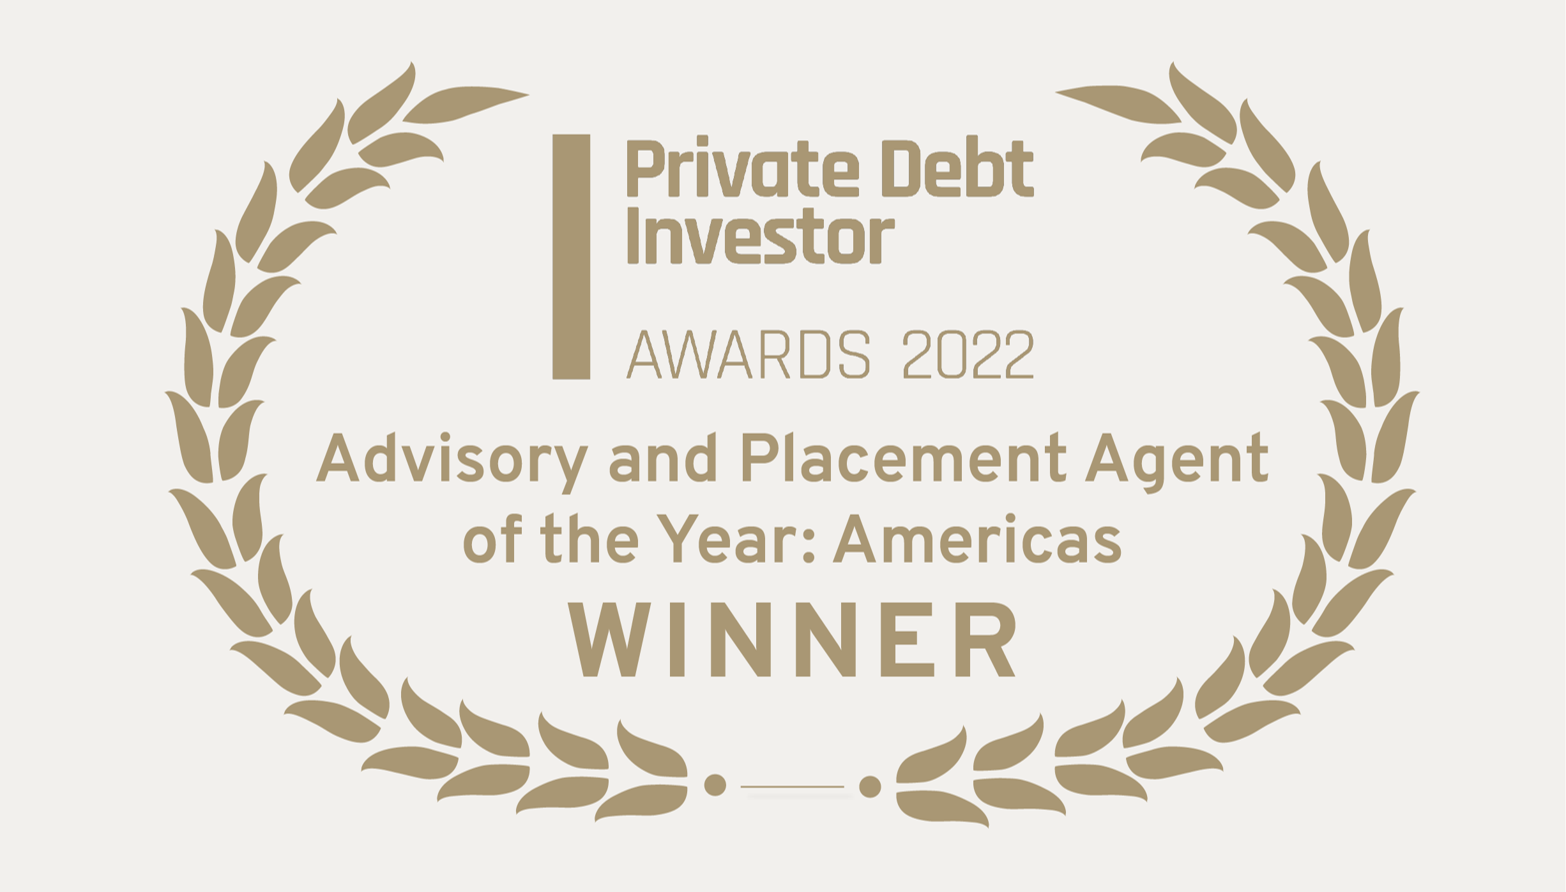 PDI Placement Agent of the Year (Americas) Award